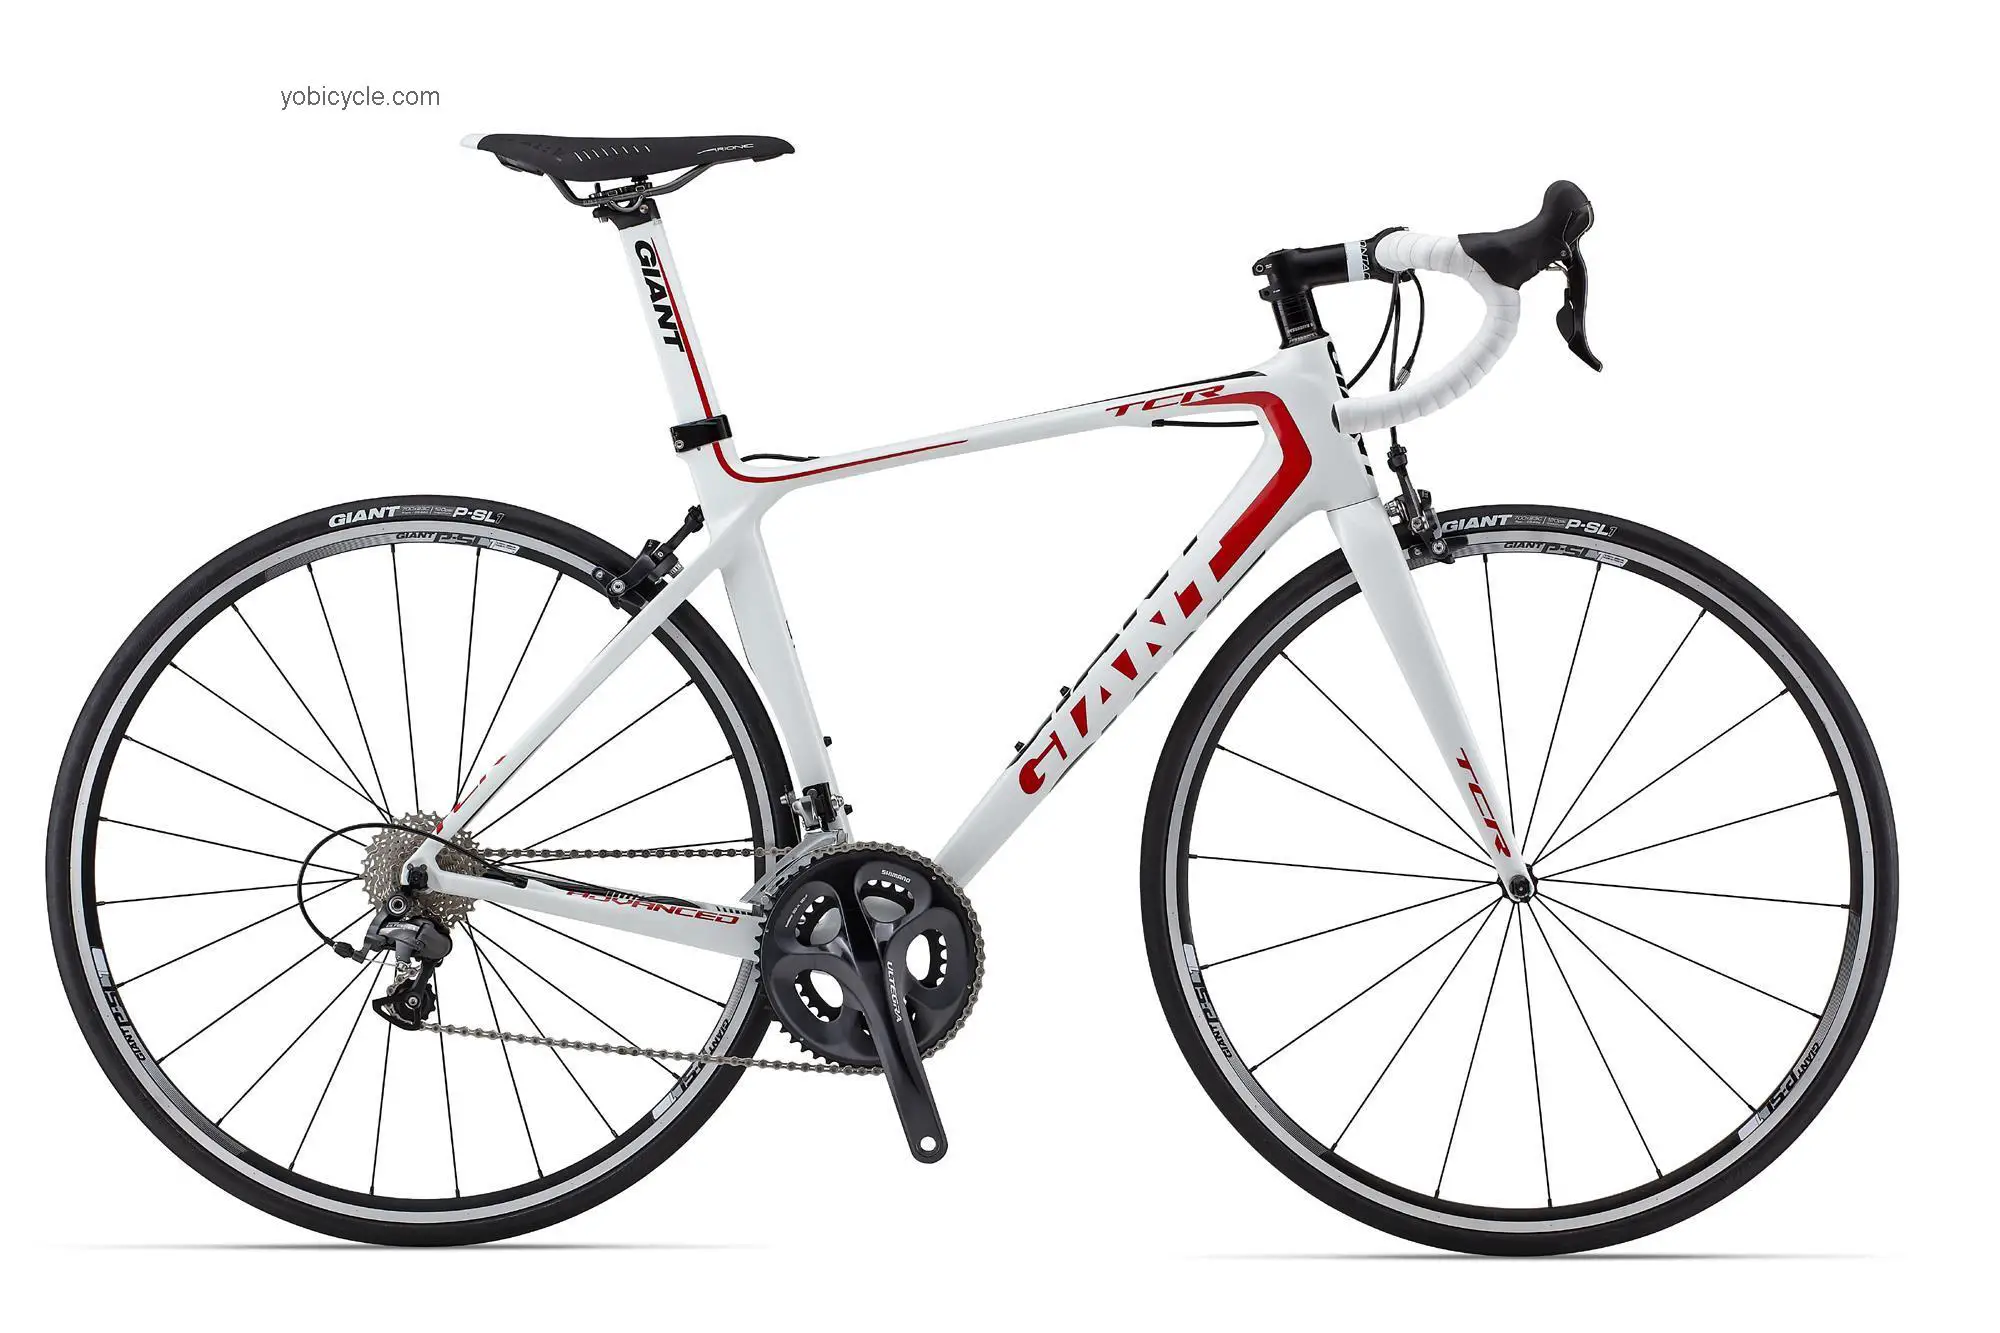 Giant TCR Advanced 1 2013 comparison online with competitors